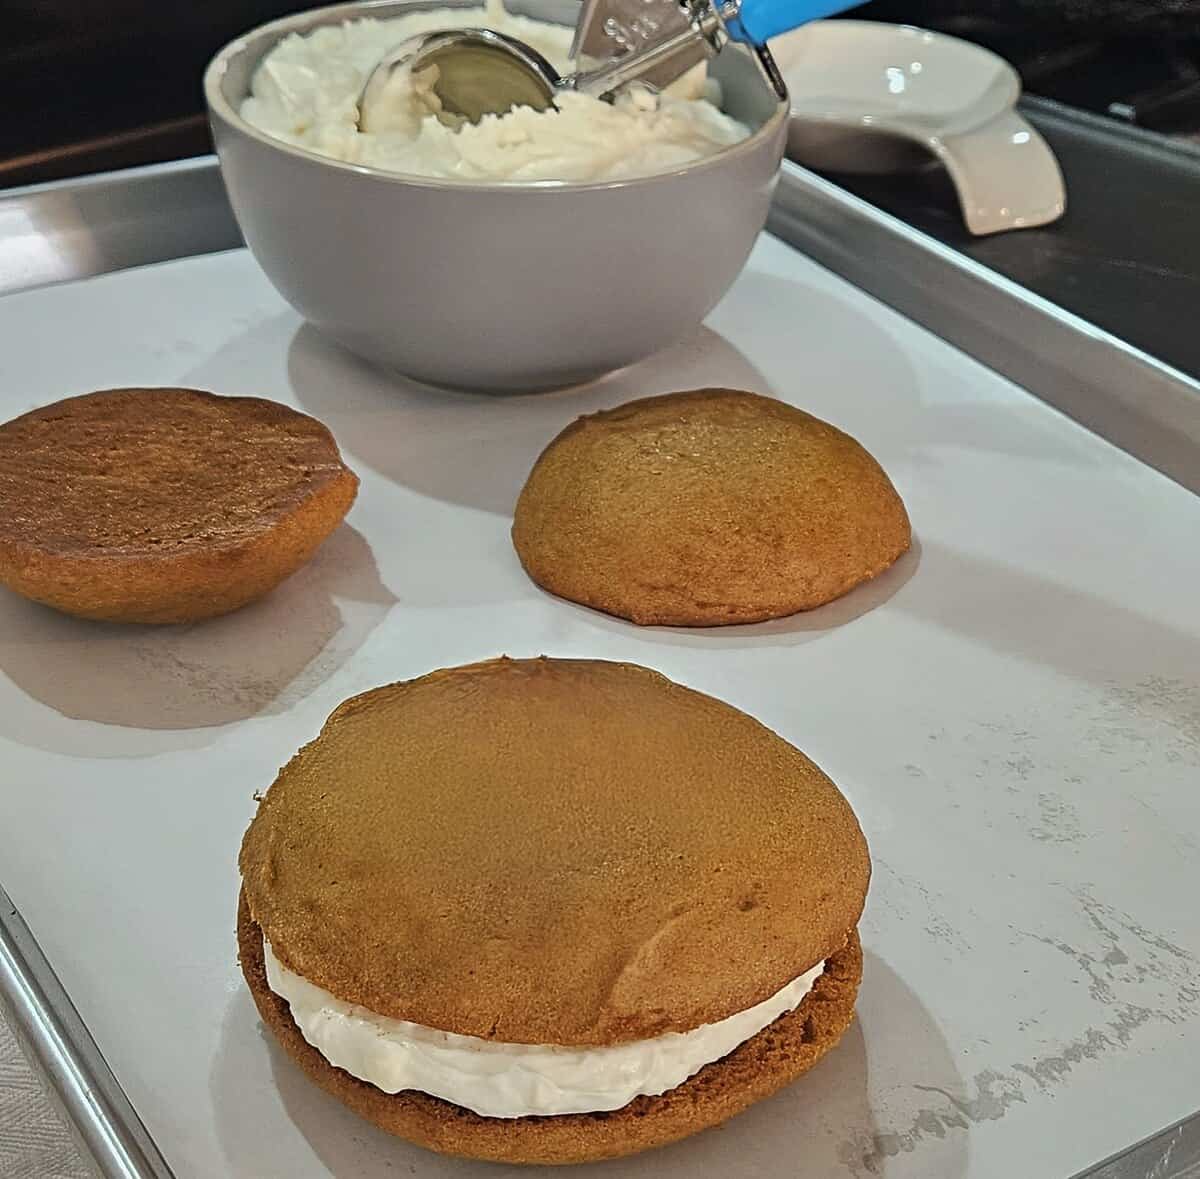 assembly of pumpkin whoopie pies, fully assembled cakes with cream cheese filling in between them, two cakes laying aside with no filling, filling in a bowl with a scoop in it ready to be used for filling.